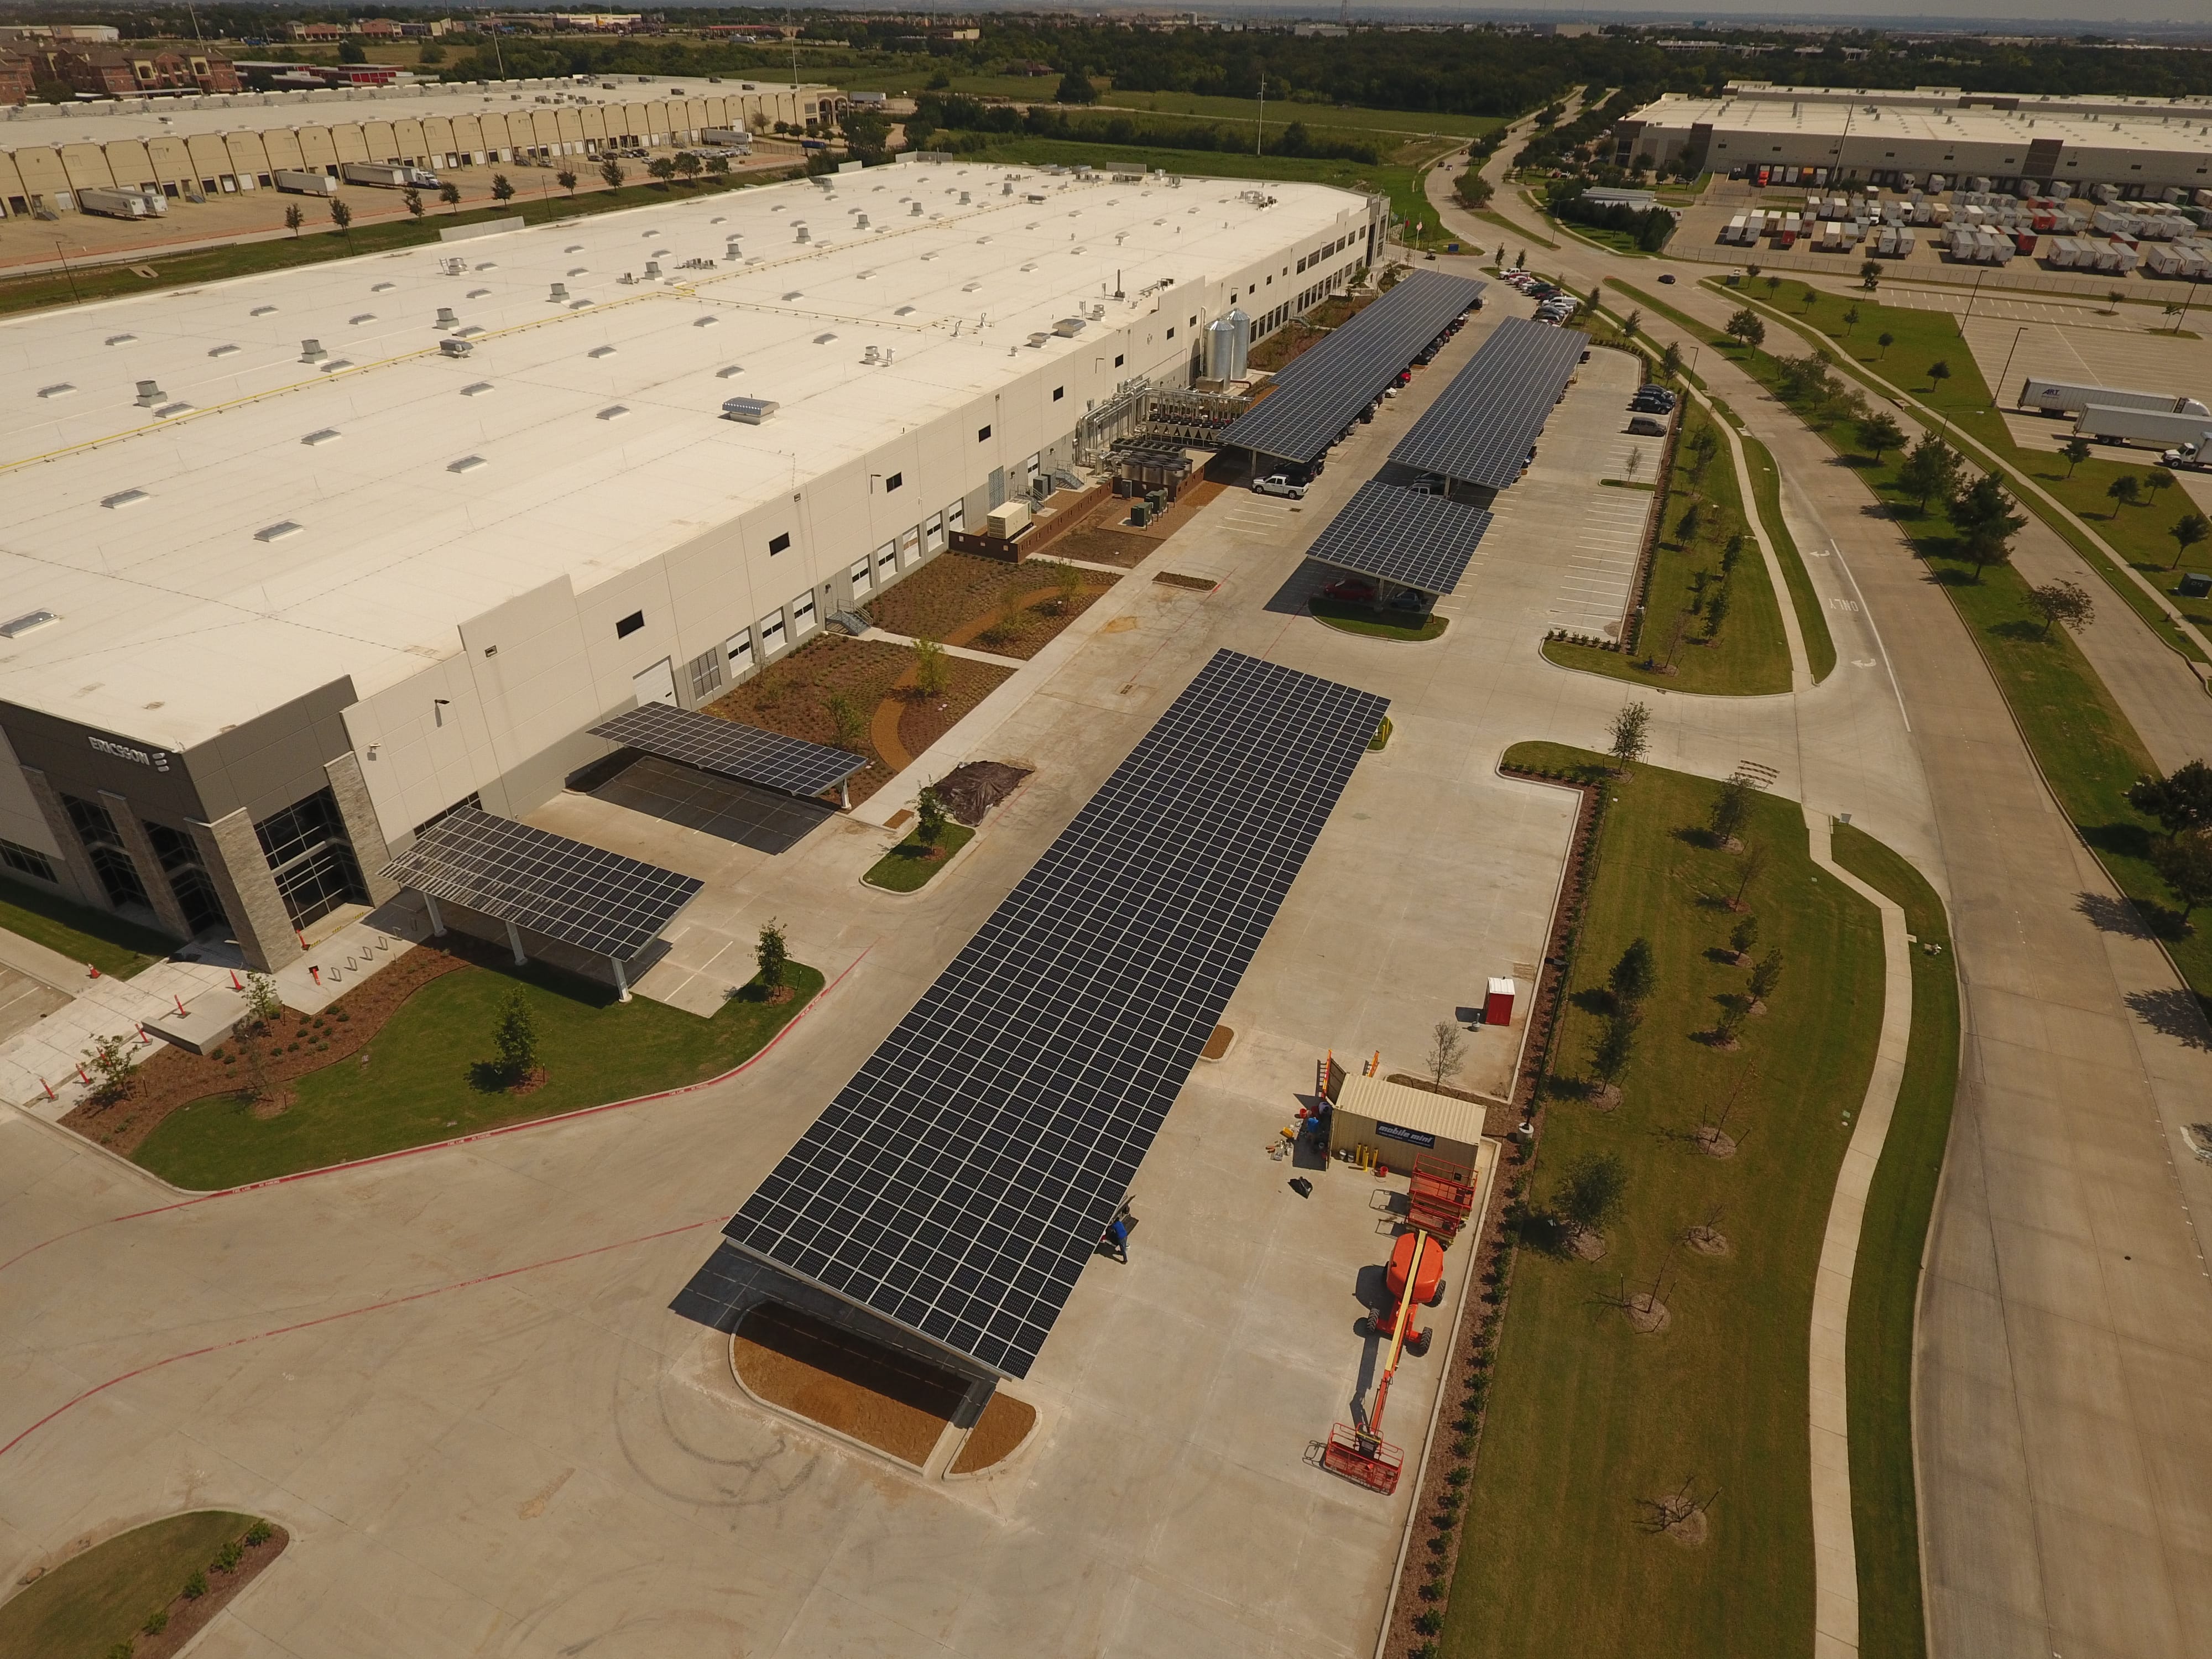 633 kW carport mounted system installed for Ericsson's 5G manufacturing facility